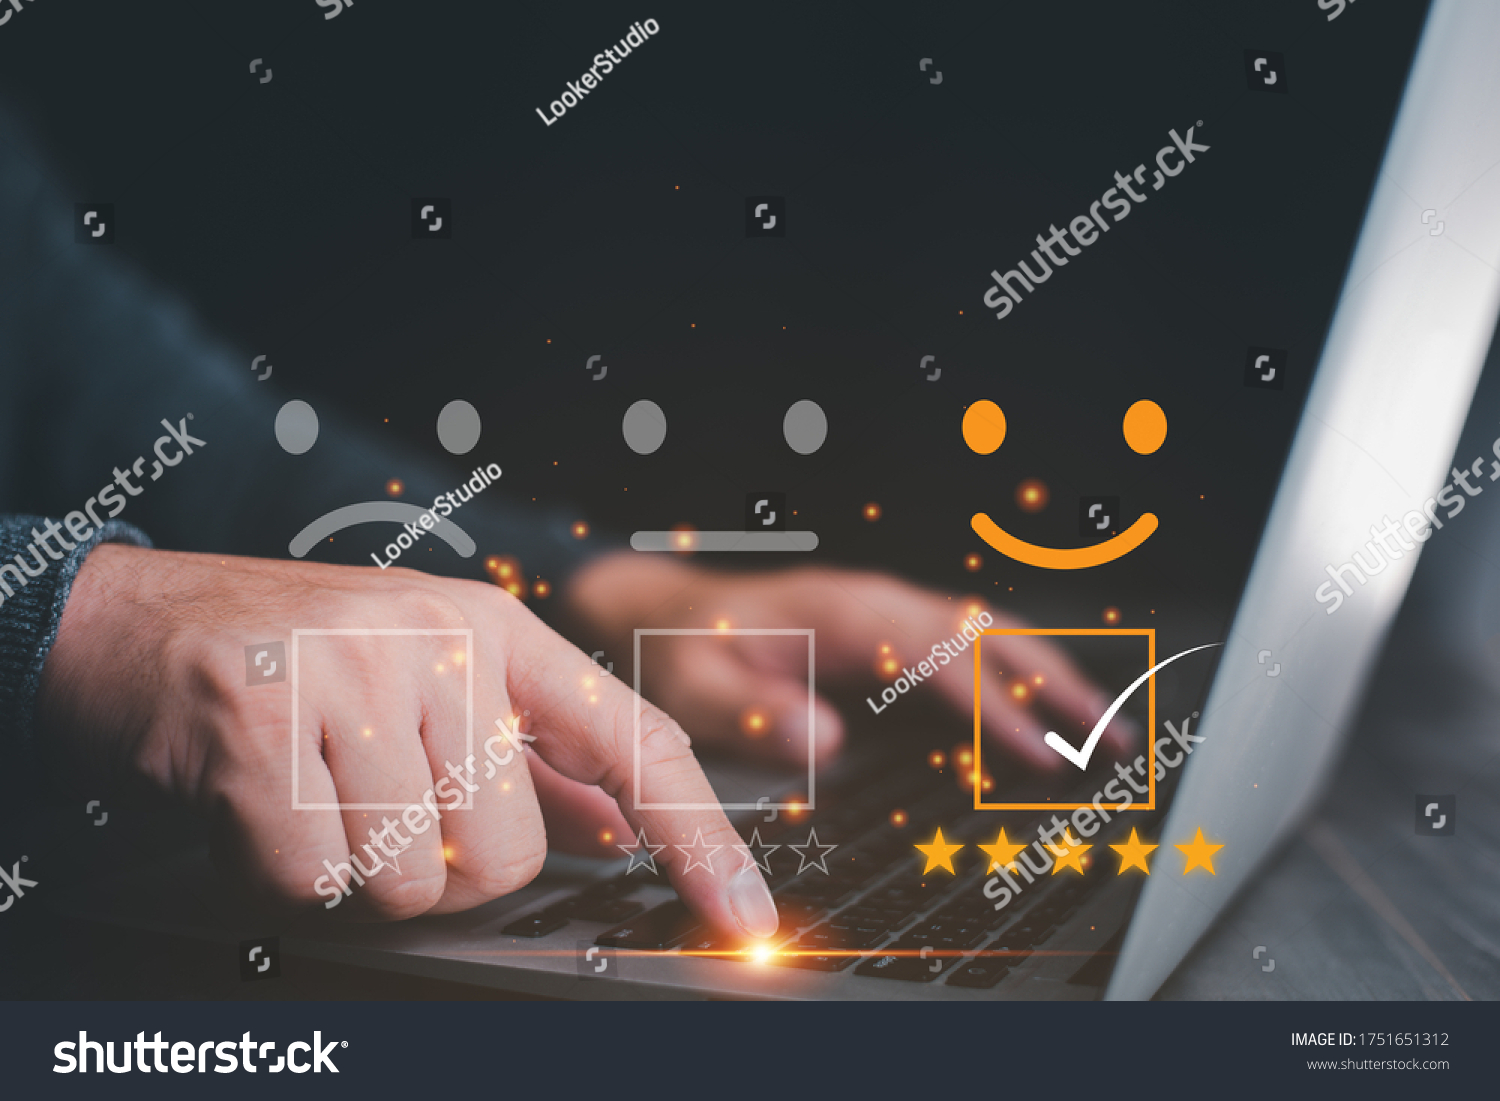 Customer service satisfaction survey concept.Business people or customers show satisfaction through the application on the tablet screen. By giving the most satisfaction rating and 5 stars. #1751651312